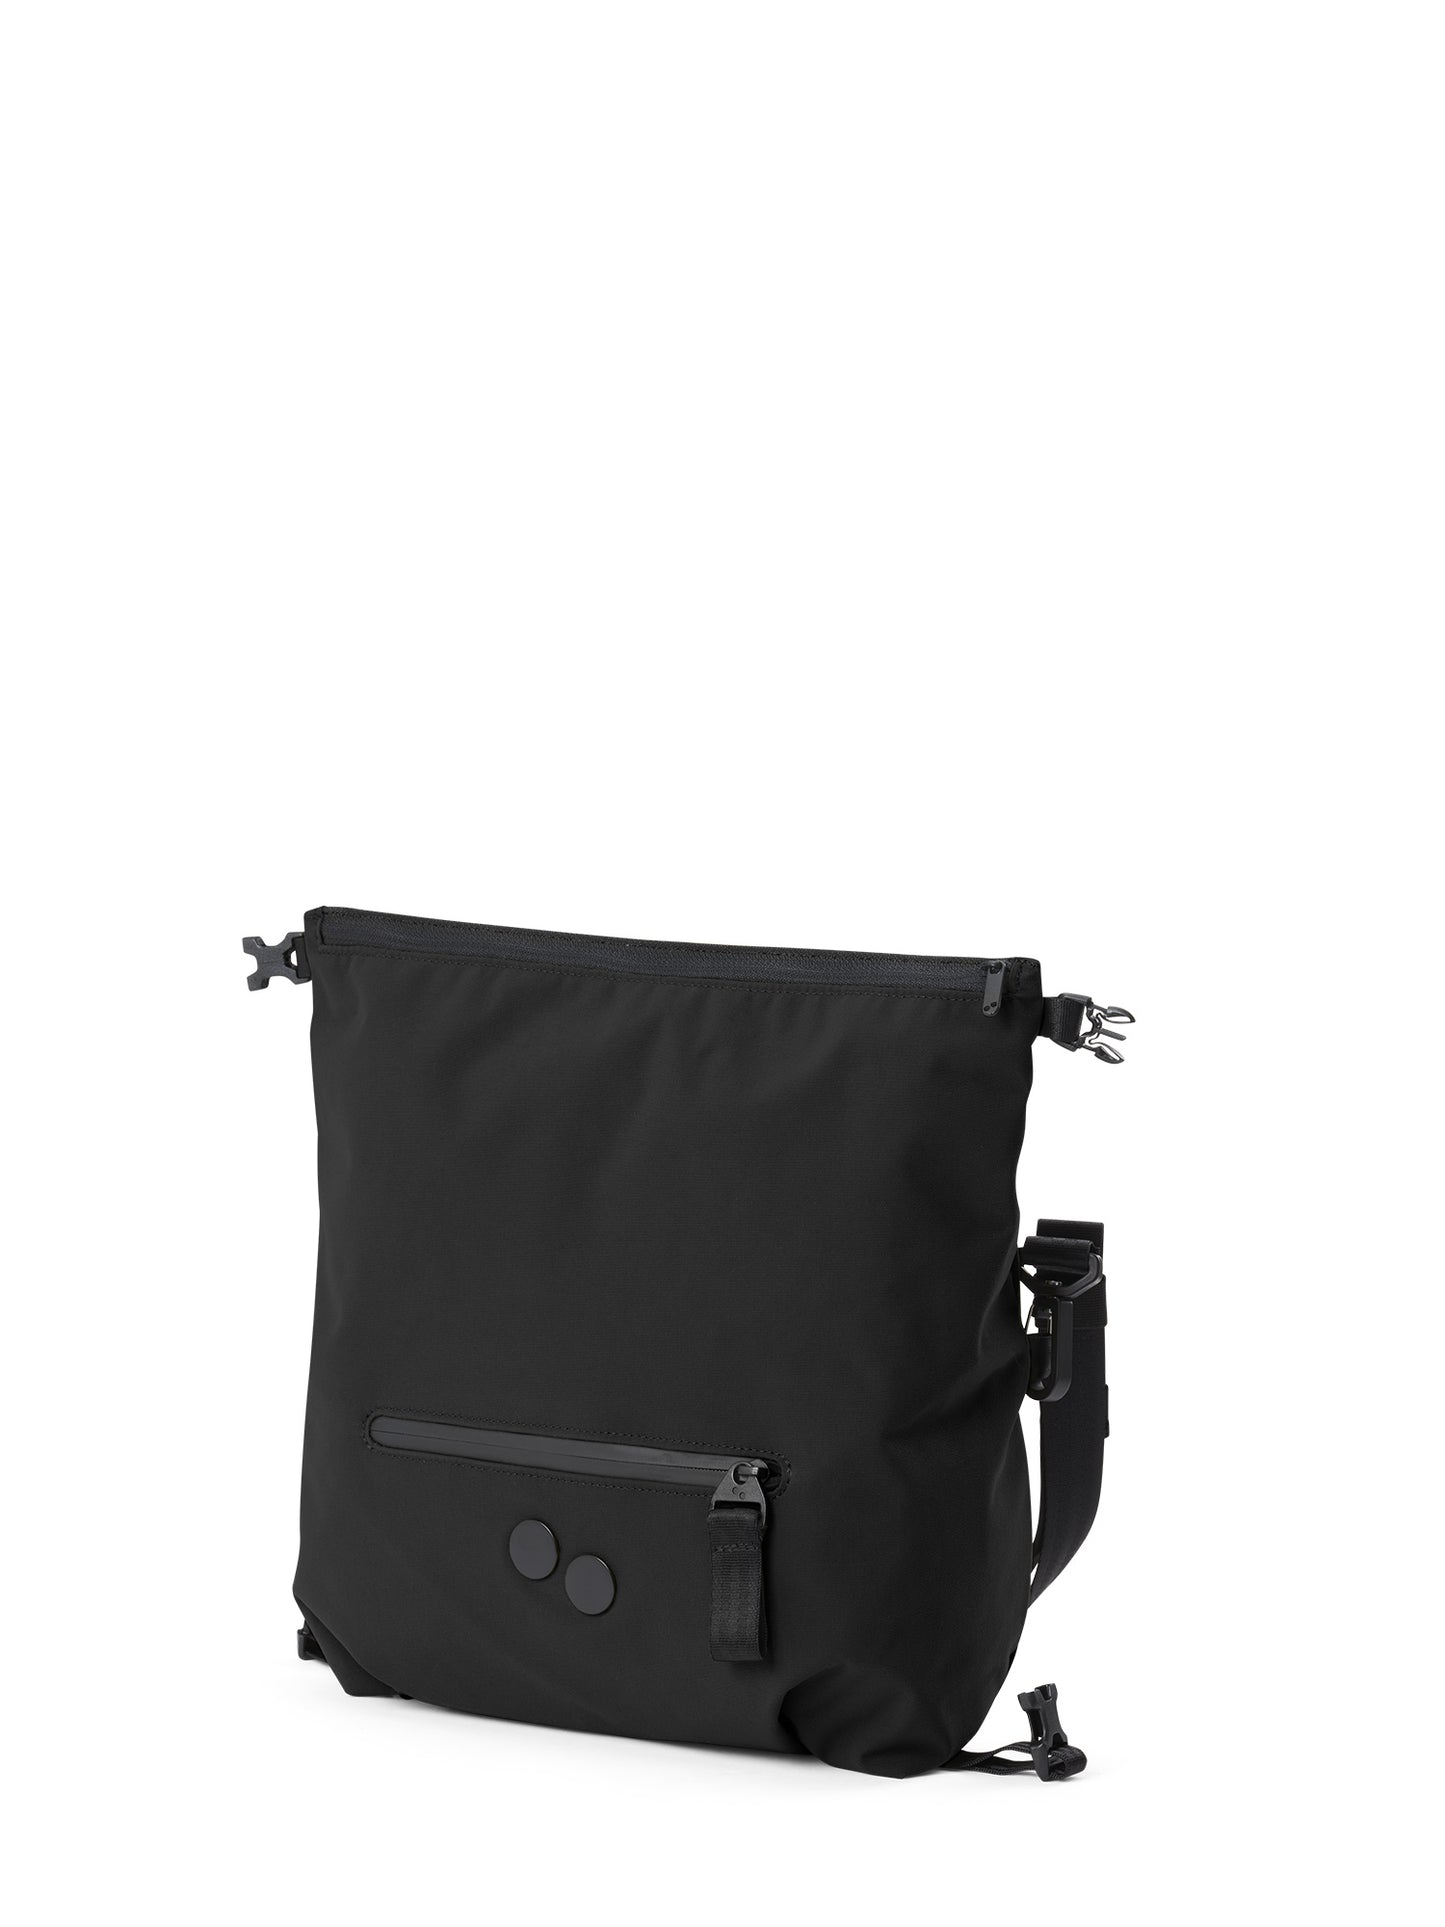 pinqponq-Aksel-Solid-Black-front